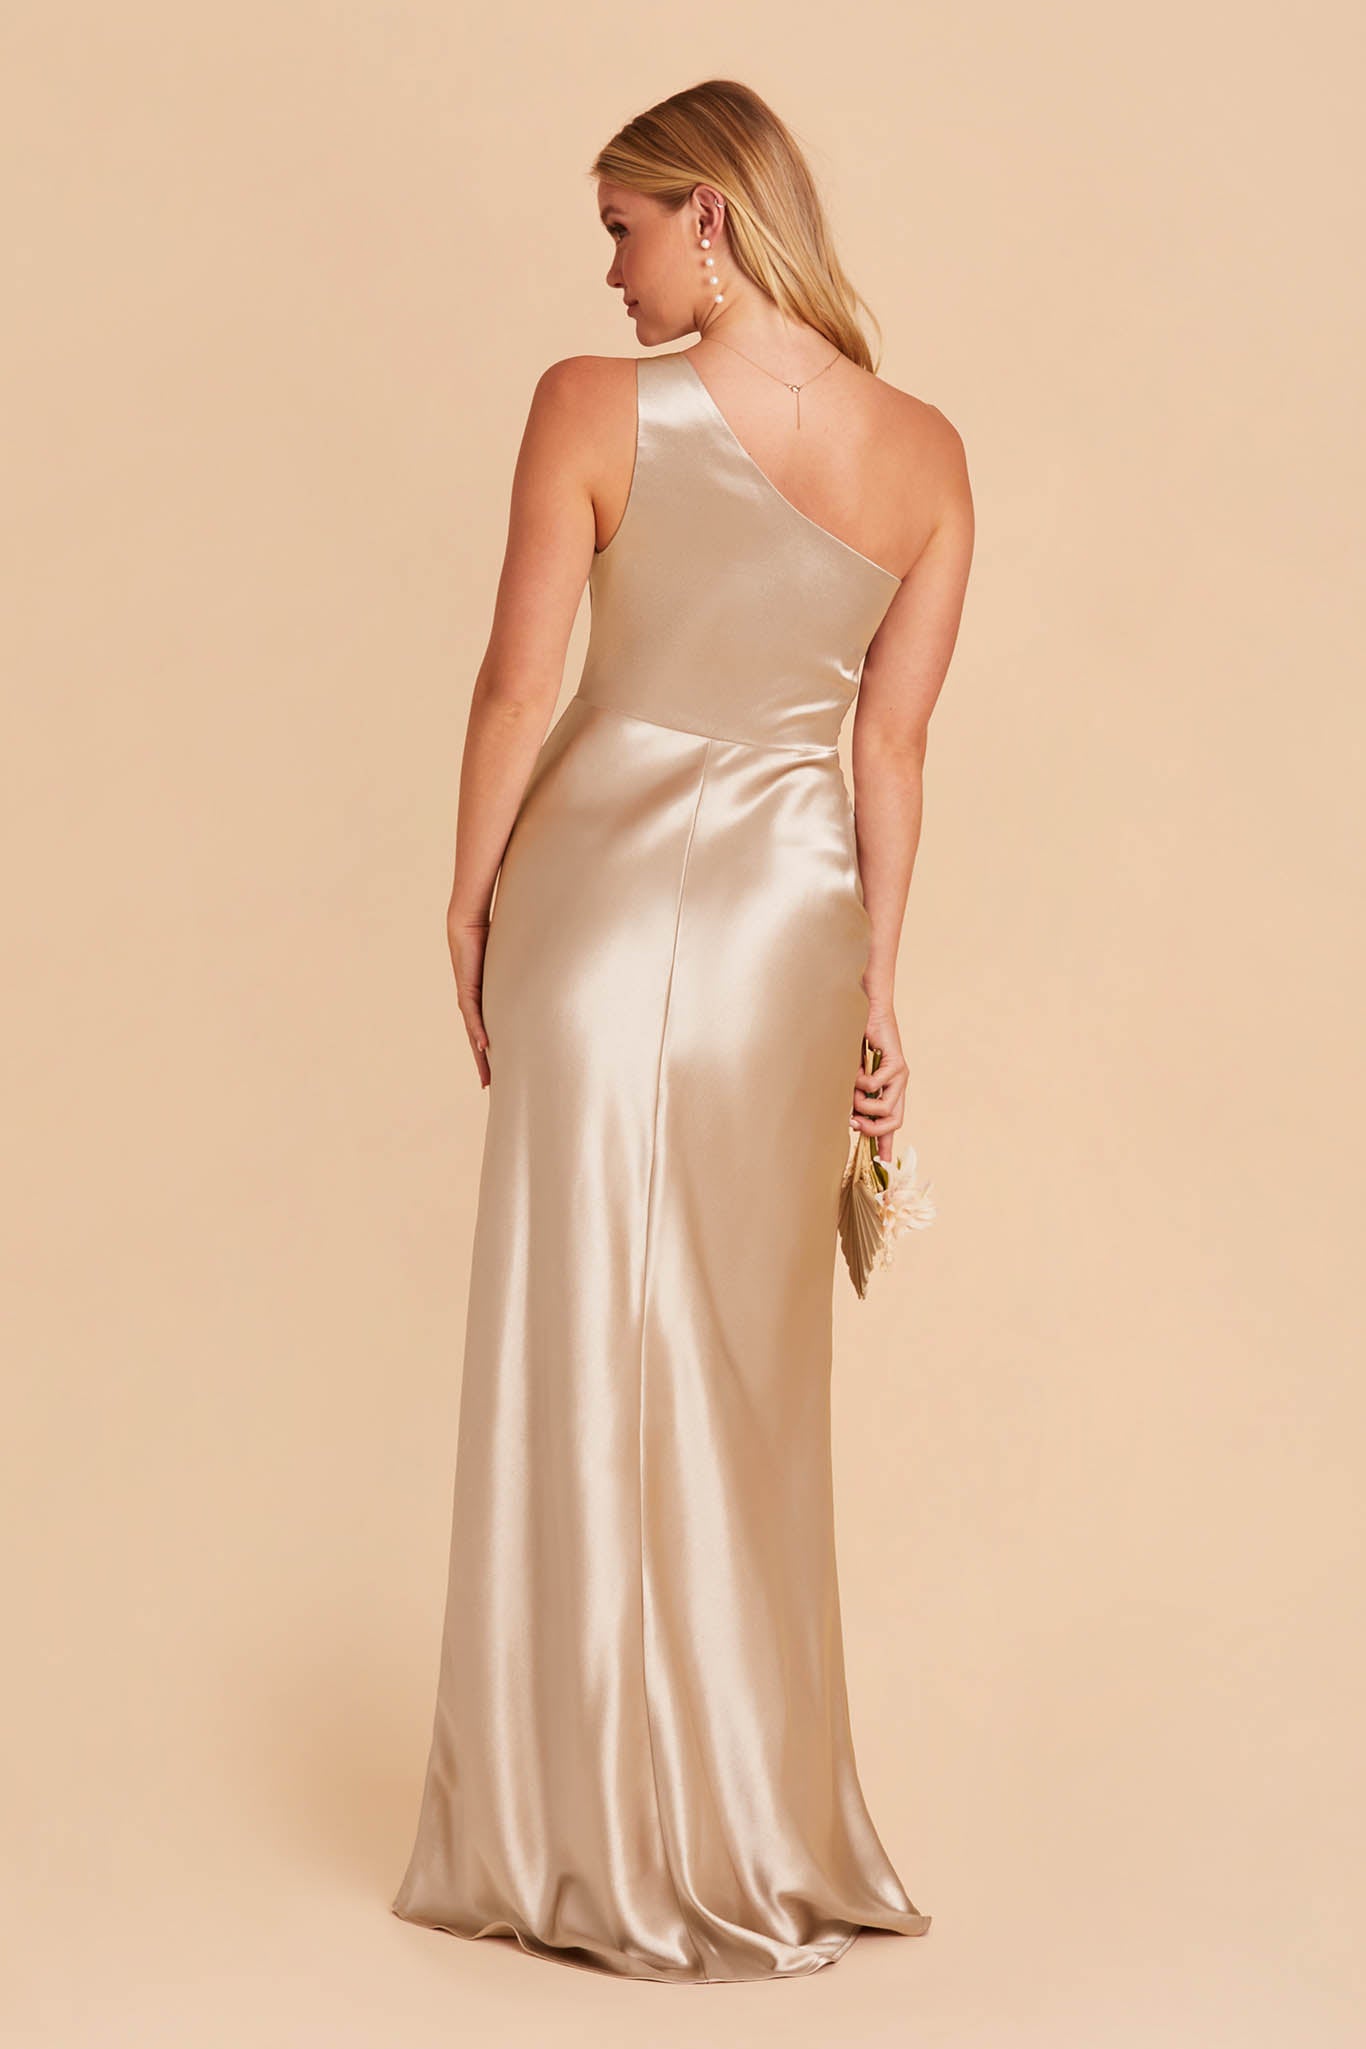 Back view of the Kira Dress in neutral champagne satin shows a slender figured model with a light skin tone. The back of the dress has a smooth fit in the one-shoulder bodice and waist flaring into a mermaid style skirt.  